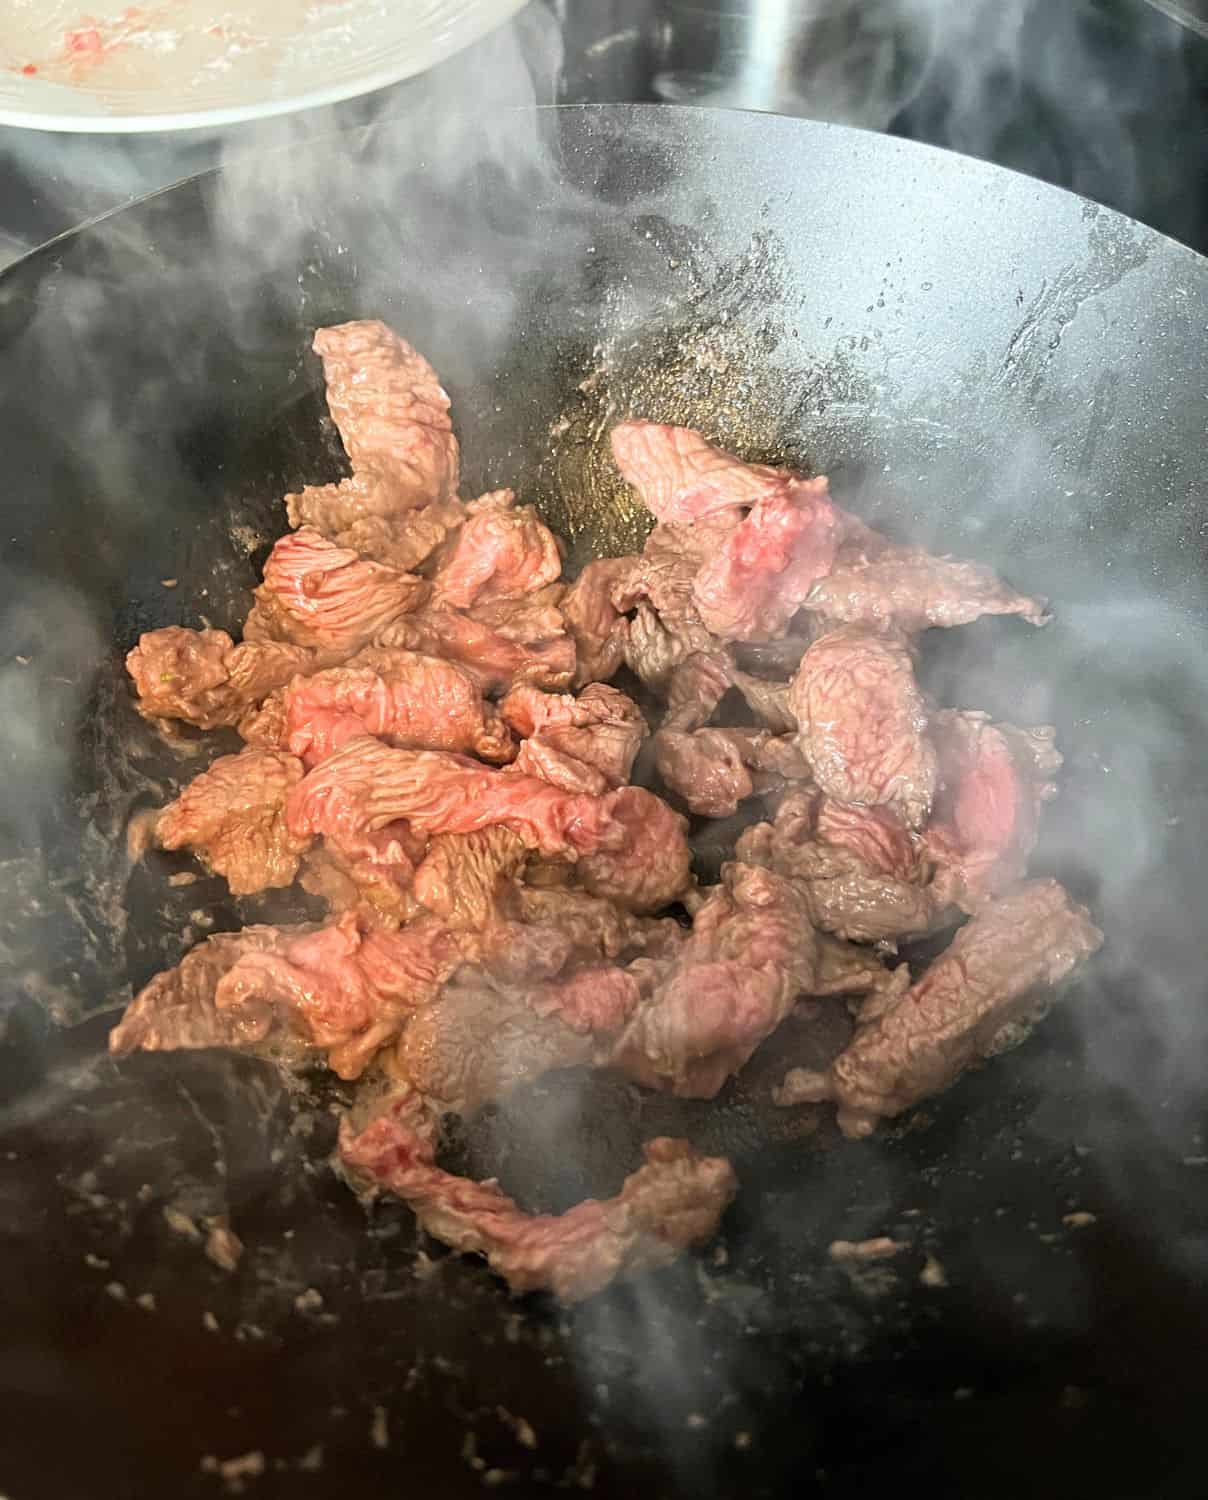 Beef cooking in a wok. 